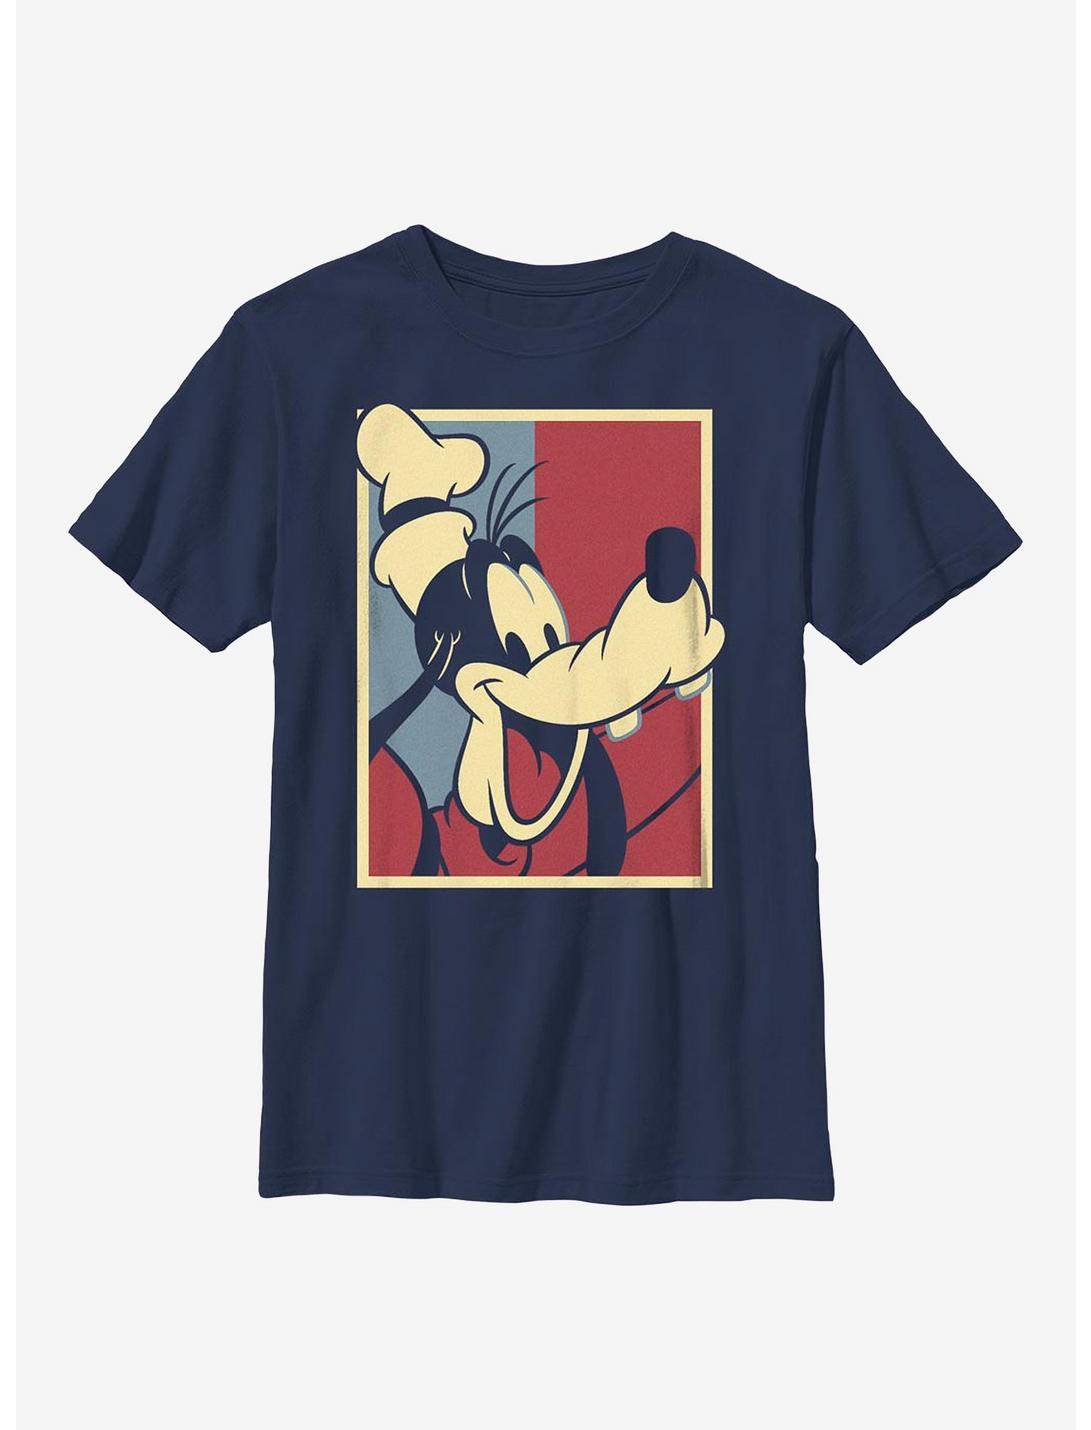 Disney Goofy Red And Blue Youth T-Shirt, NAVY, hi-res